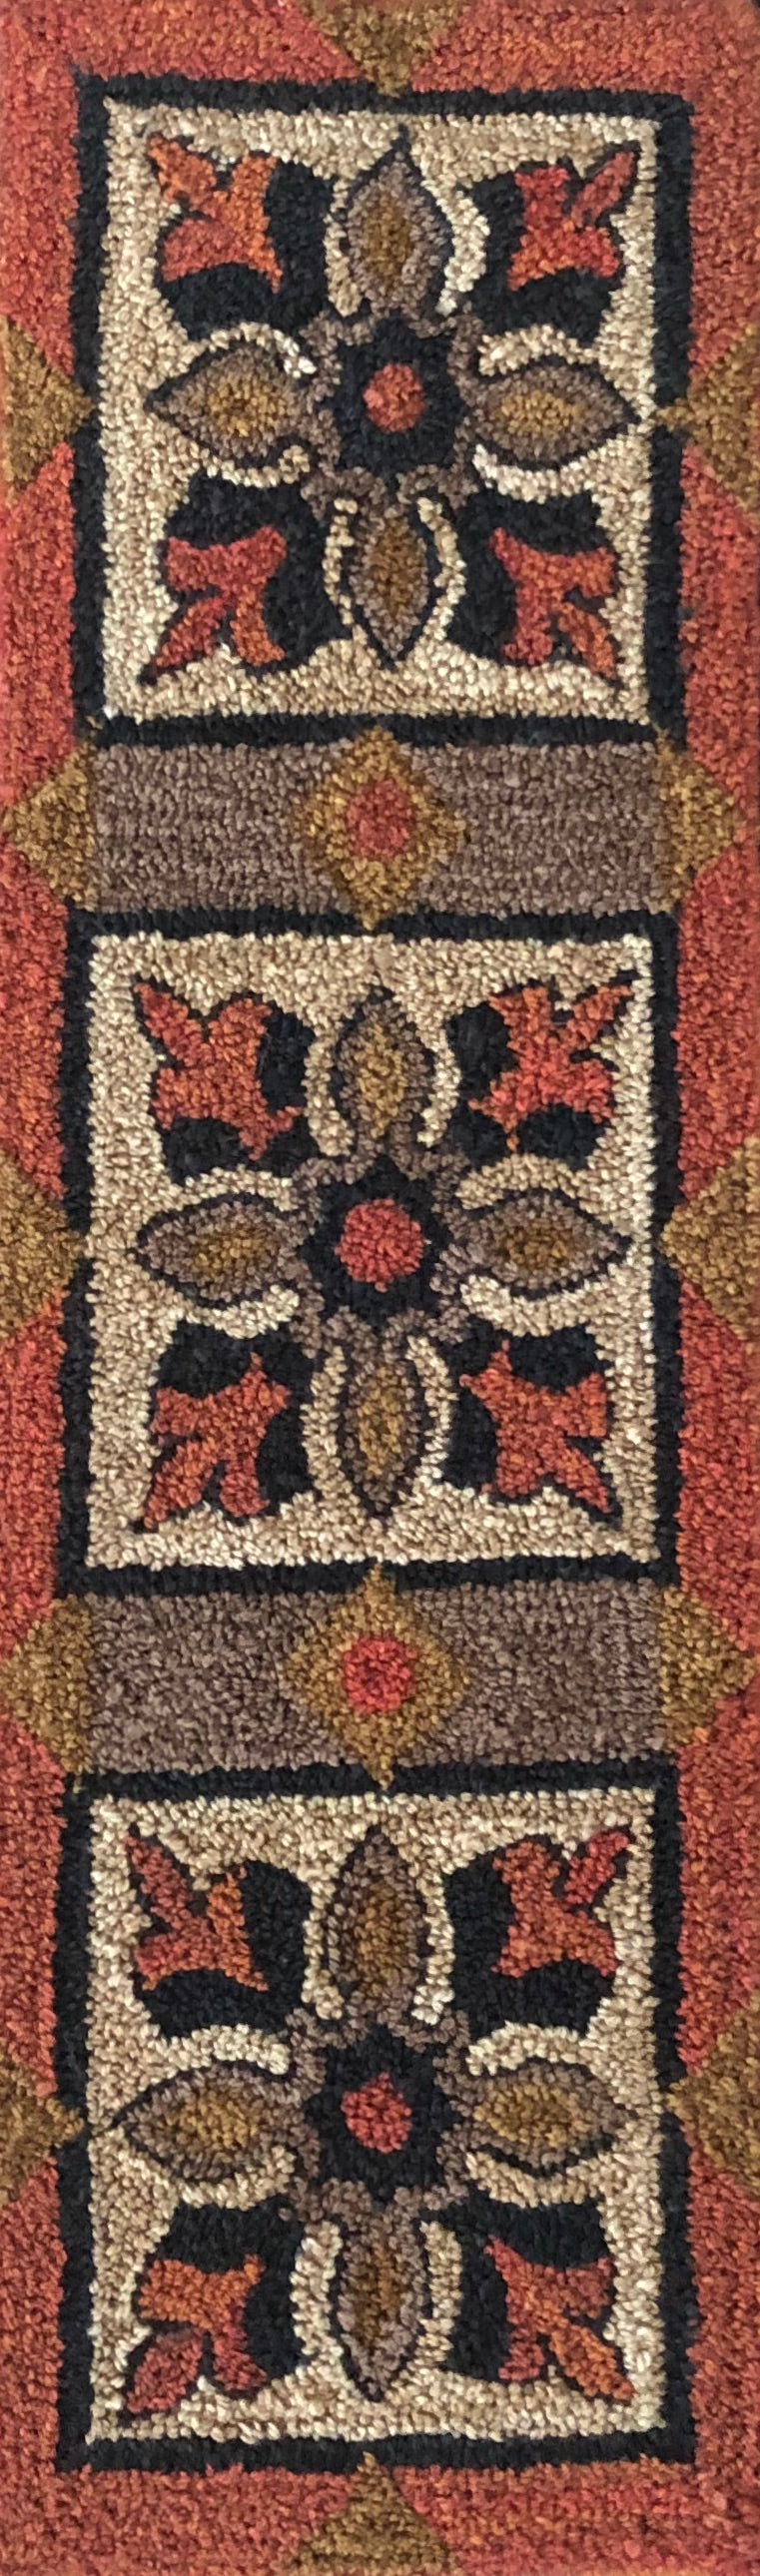 Large Trio- PDF Digital Download Rug Hooking or Rug Punch Needle Pattern by Orphaned Wool. This is a simple by sophisticated design. Makes a fantastic floor runner or tabletop runner. Paper Pattern designed to be enlarged, perfect for creating a custom size pattern.